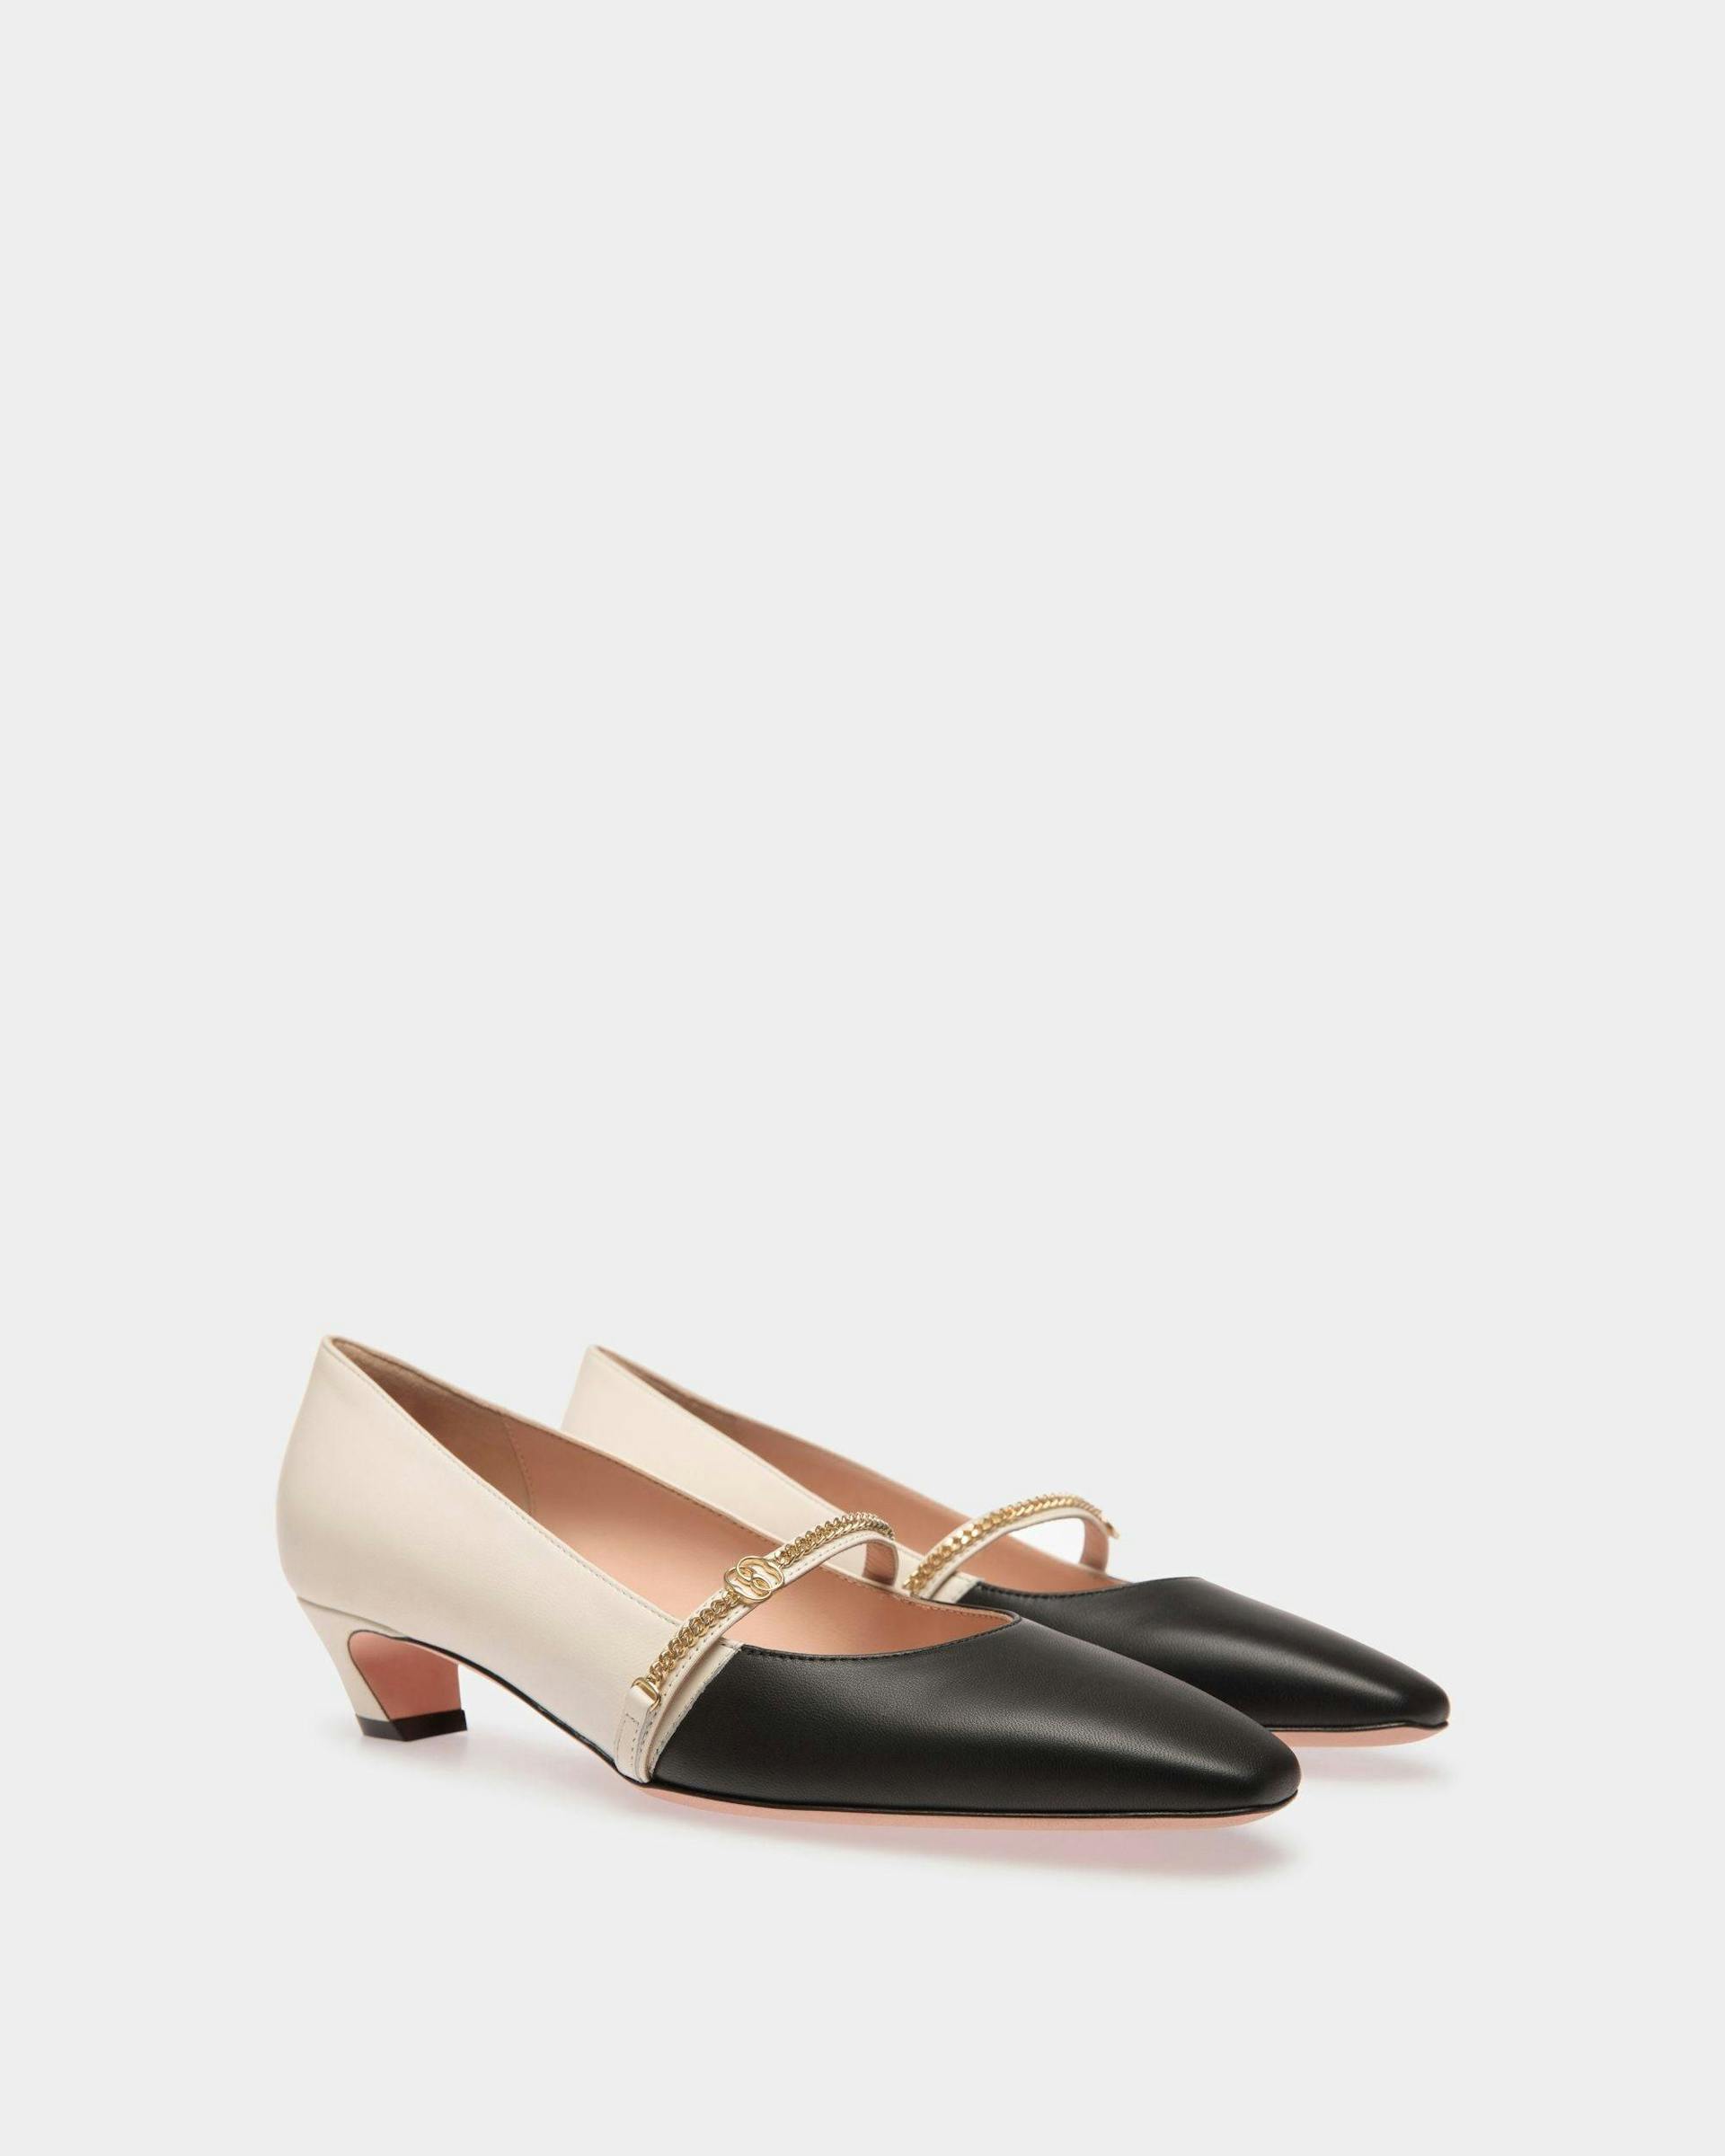 Women's Sylt Mary-Jane Pump In Black And White Leather | Bally | Still Life 3/4 Front